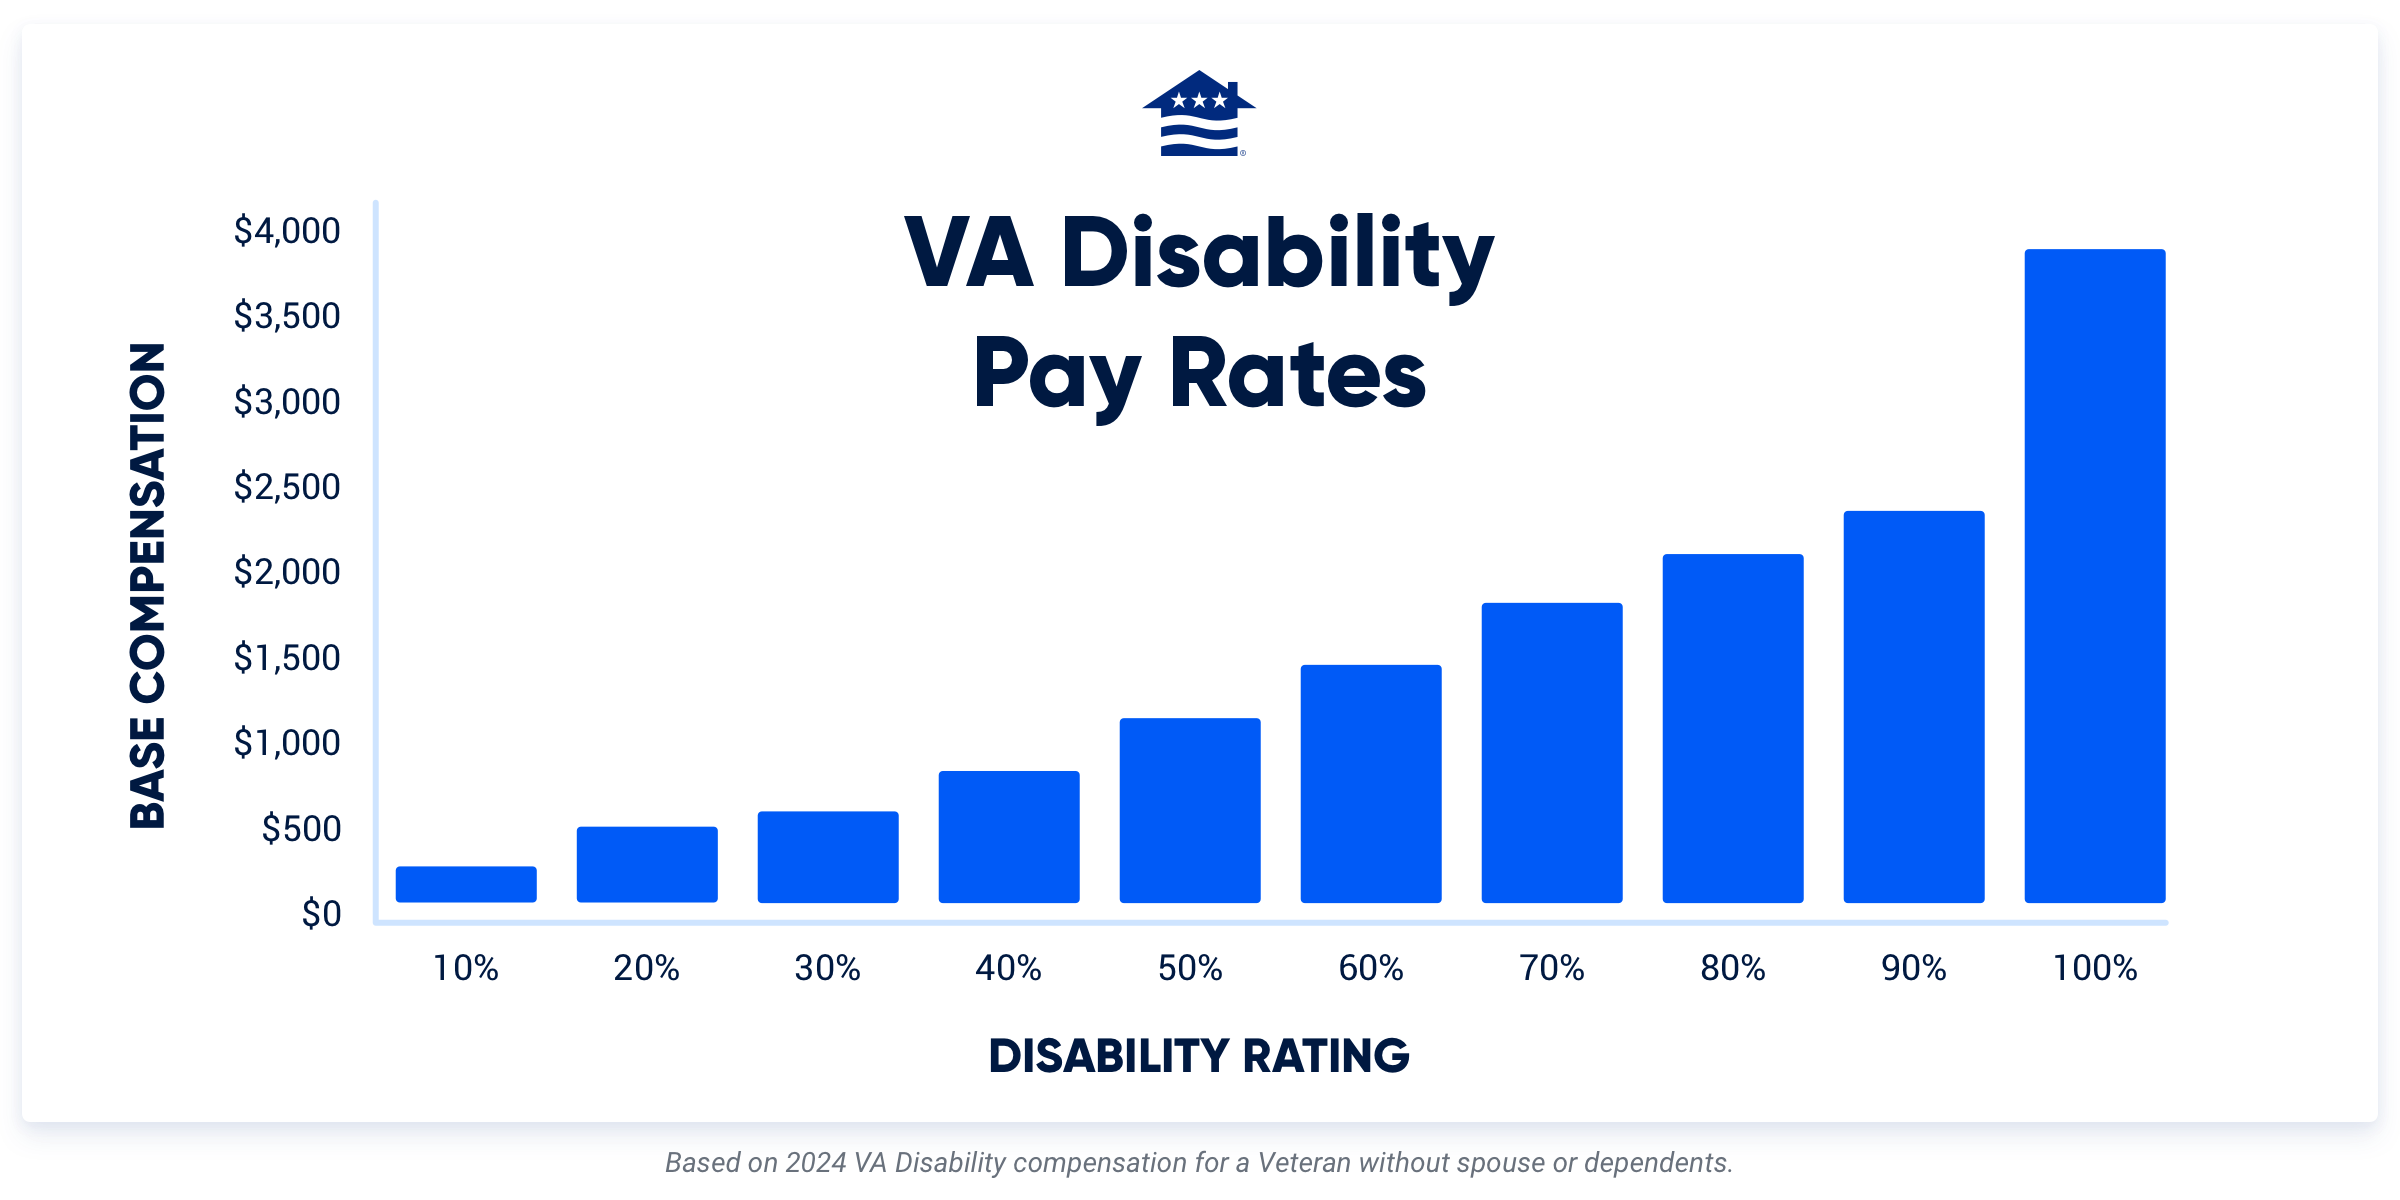 The image is a bar chart showing VA Disability Pay Rates for 2024, with increasing compensation amounts for disability ratings from 10% to 100%. The note specifies that the data is for a veteran without a spouse or dependents.